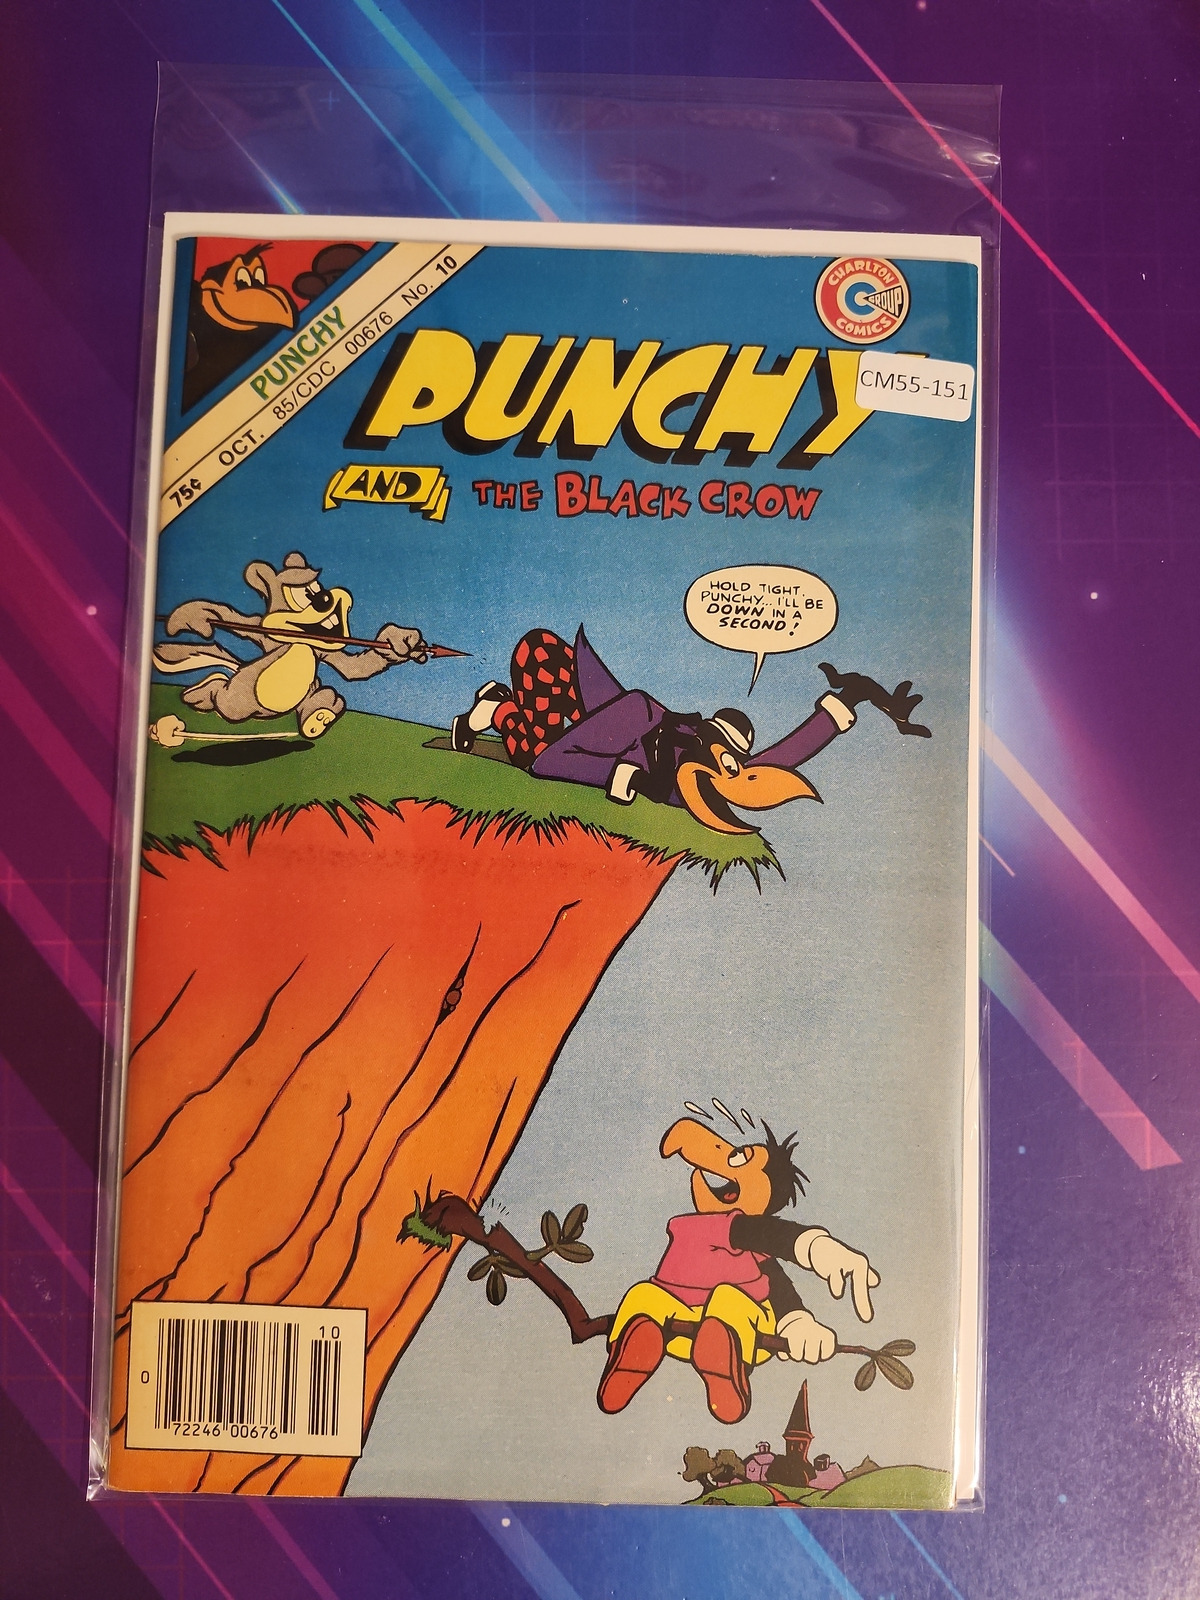 PUNCHY AND THE BLACK CROW #10 HIGH GRADE CHARLTON COMIC BOOK CM55-151